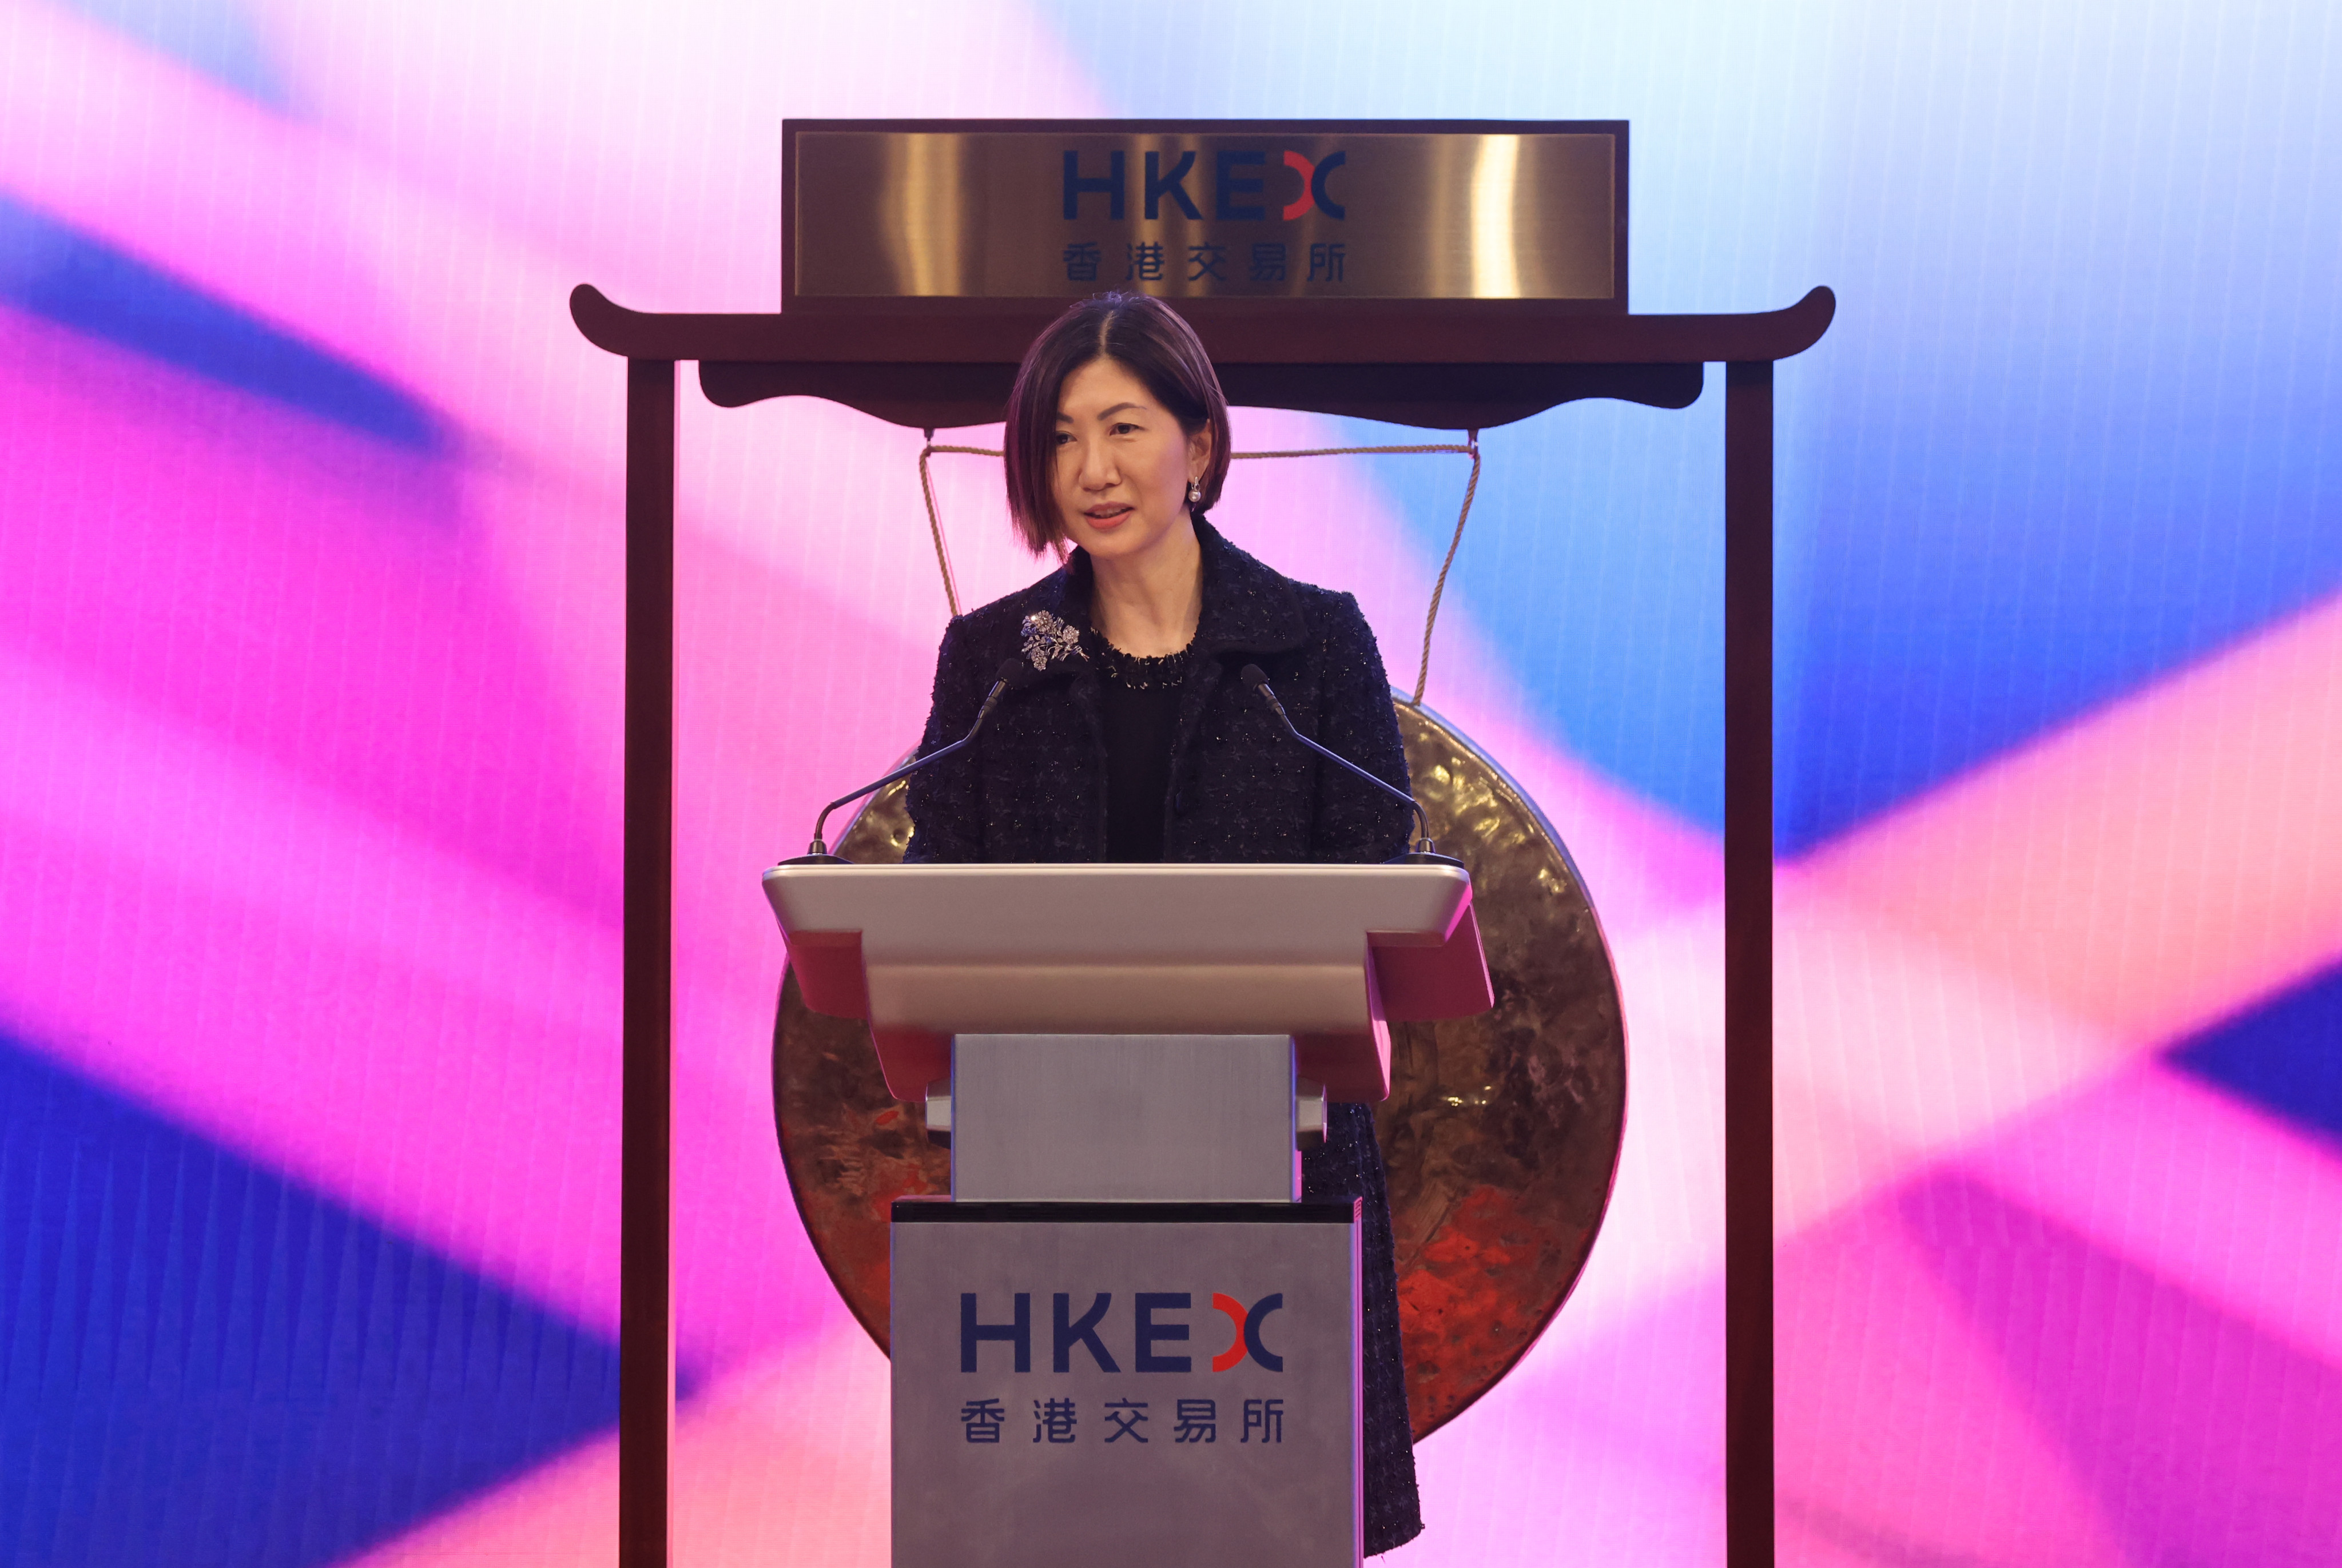 Bonnie Chan, co-chief operating officer of Hong Kong Exchanges and Clearing (HKEX), speaks during a special market closing ceremony on March 8, part of the global “Ring the Bell for Gender Equality” campaign to celebrate the power of diversity and the contribution of women in markets and communities, at HKEX in Central. Photo: May Tse